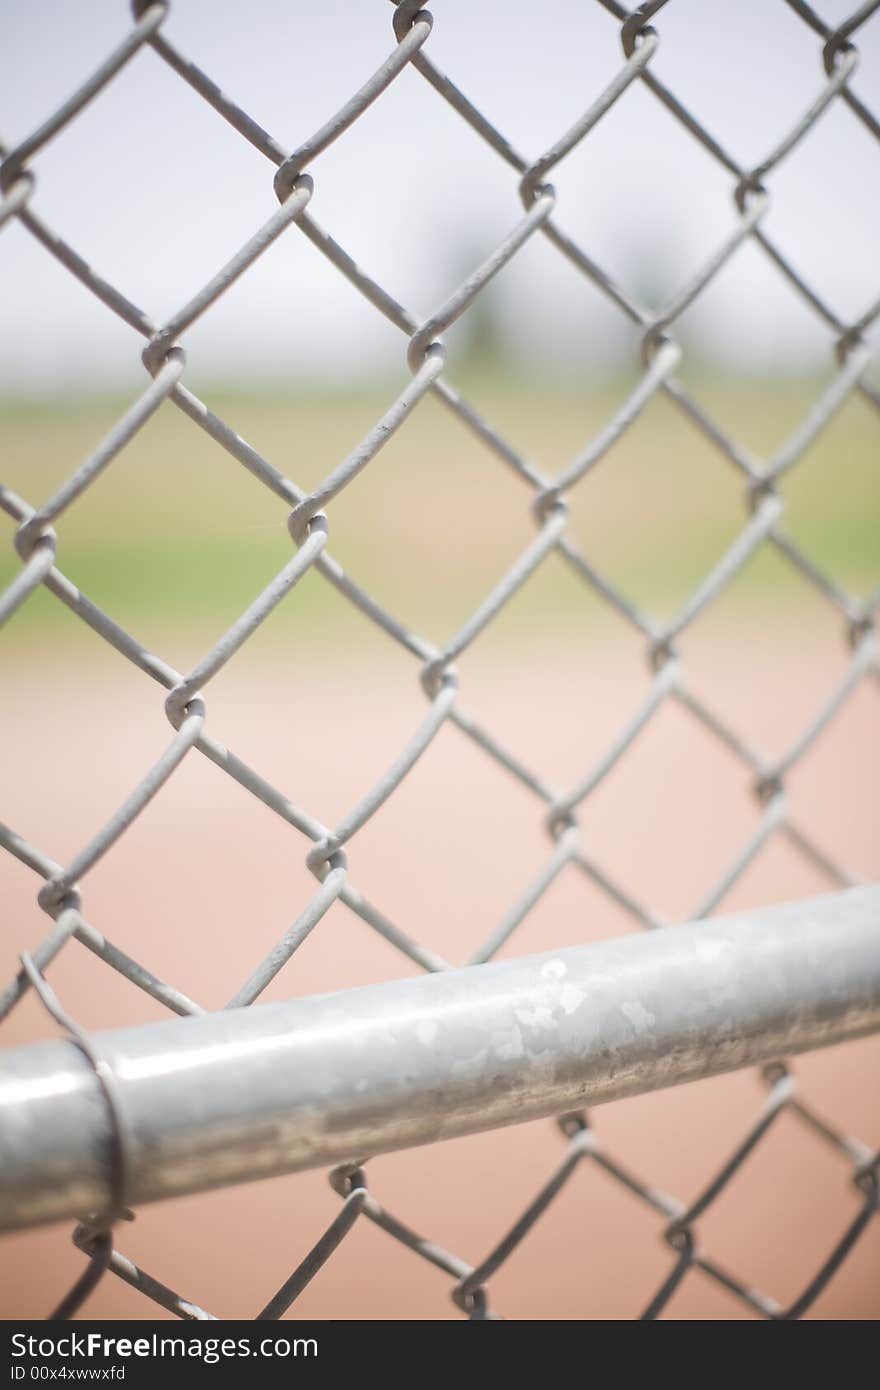 Close-up of a baseball fence outside in the summer with a chain link fence in the front and a baseball field in the background. Close-up of a baseball fence outside in the summer with a chain link fence in the front and a baseball field in the background